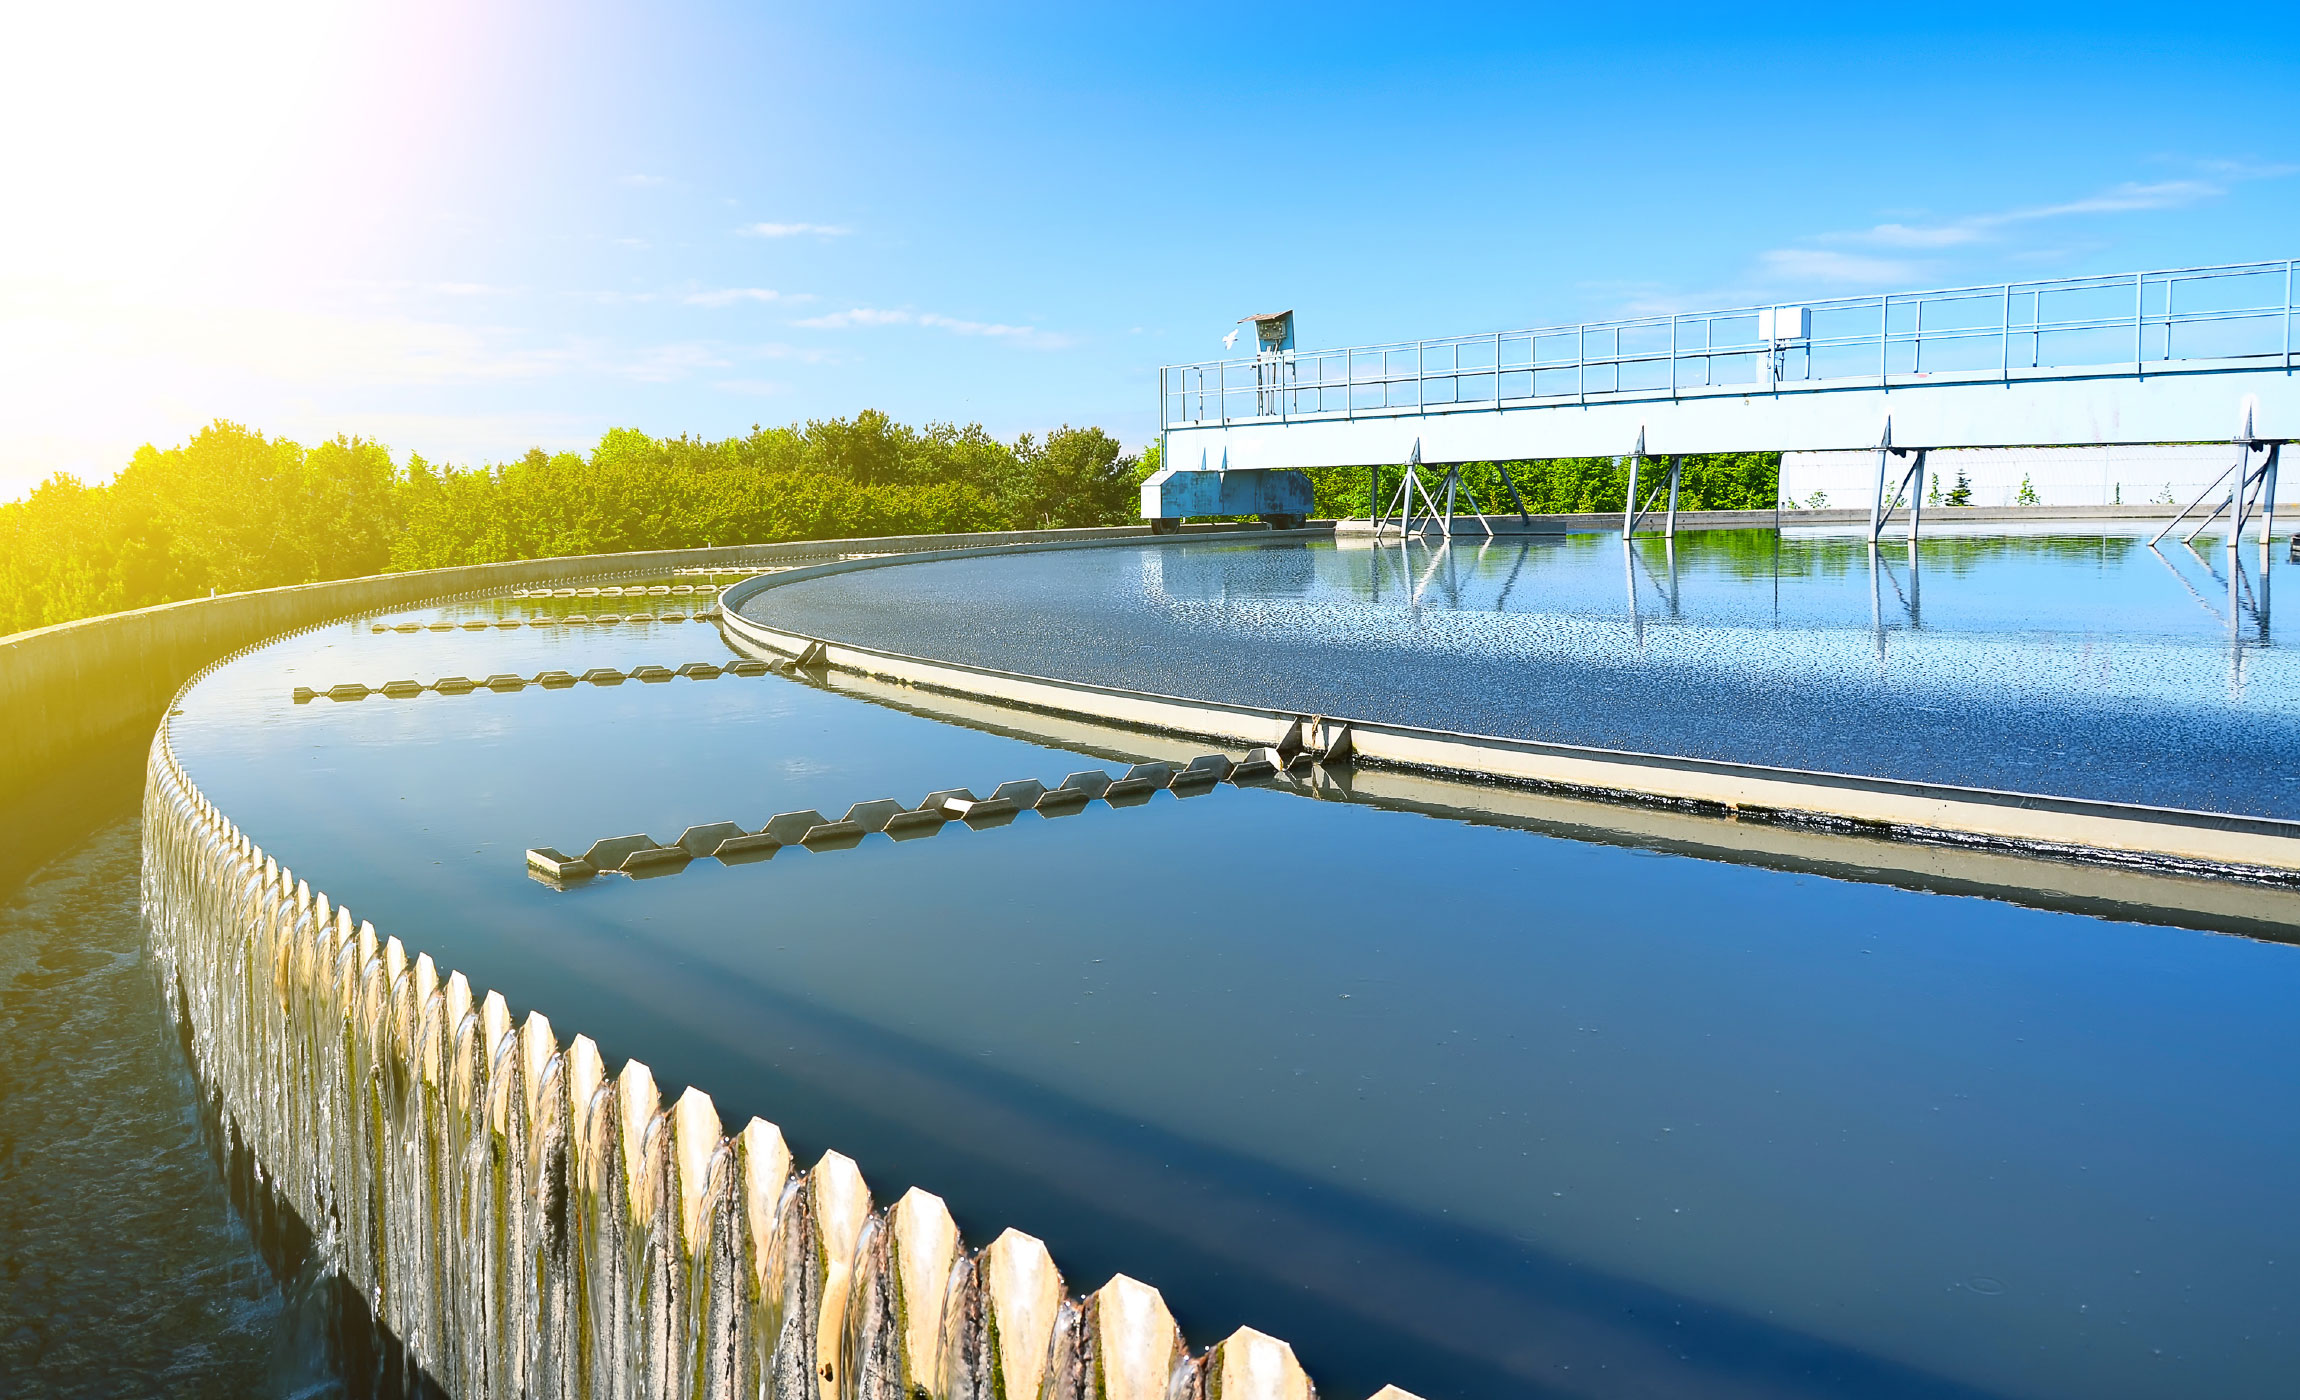 wastewater treatment types